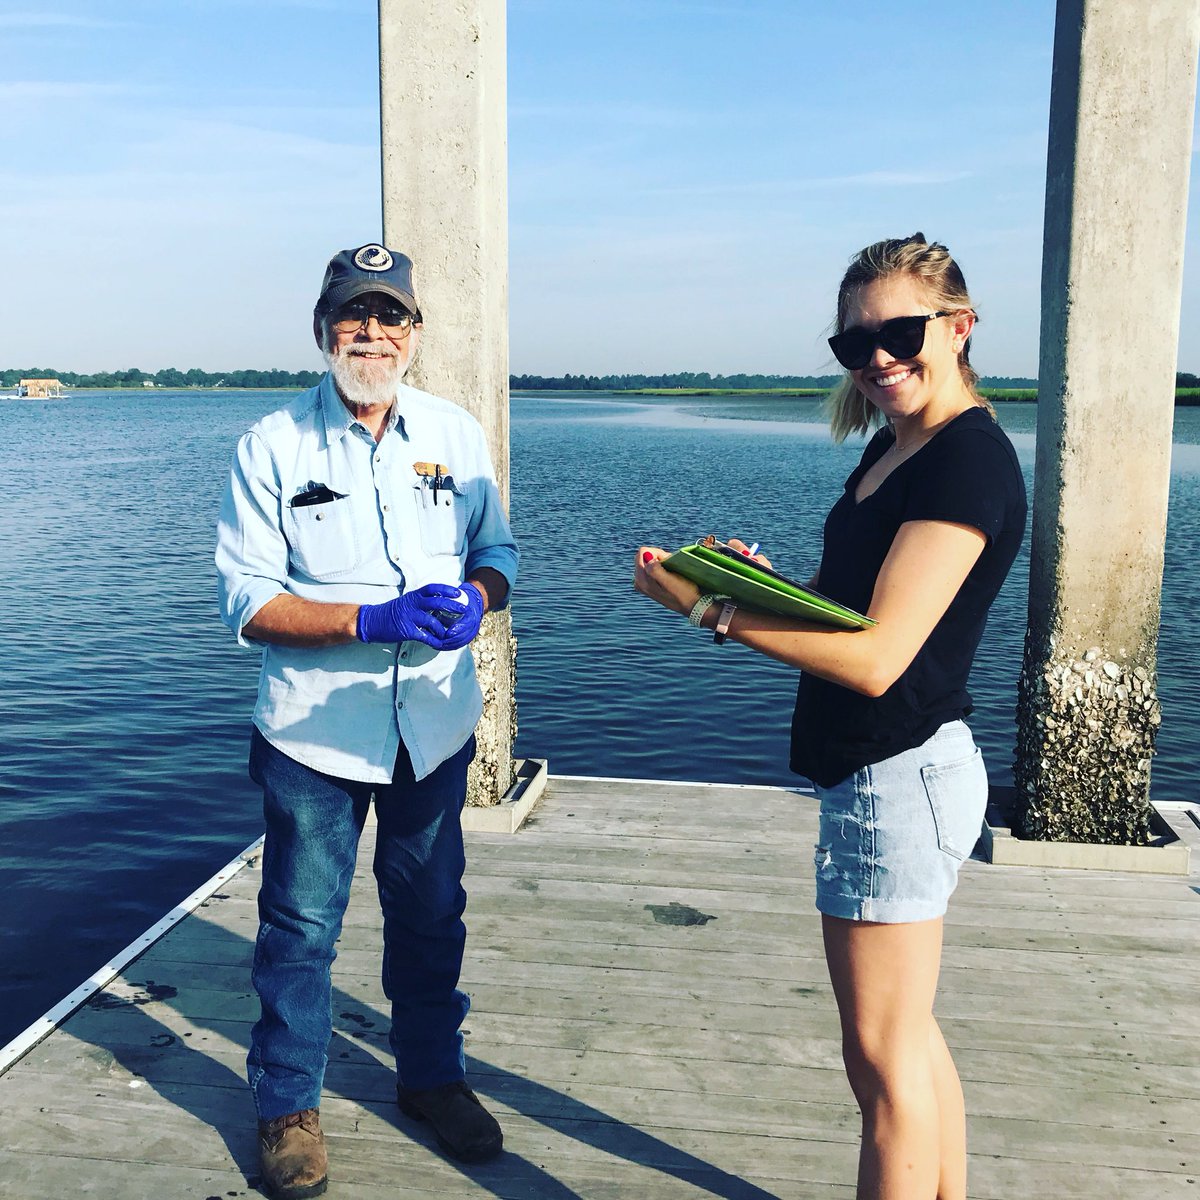 We’re so excited to have McKenna return to the team after 5 years! Carl’s been sampling for 4 years now, but McKenna was sampling from the very beginning. Now this is the A team! #waterwednesday #fieldinvestigators